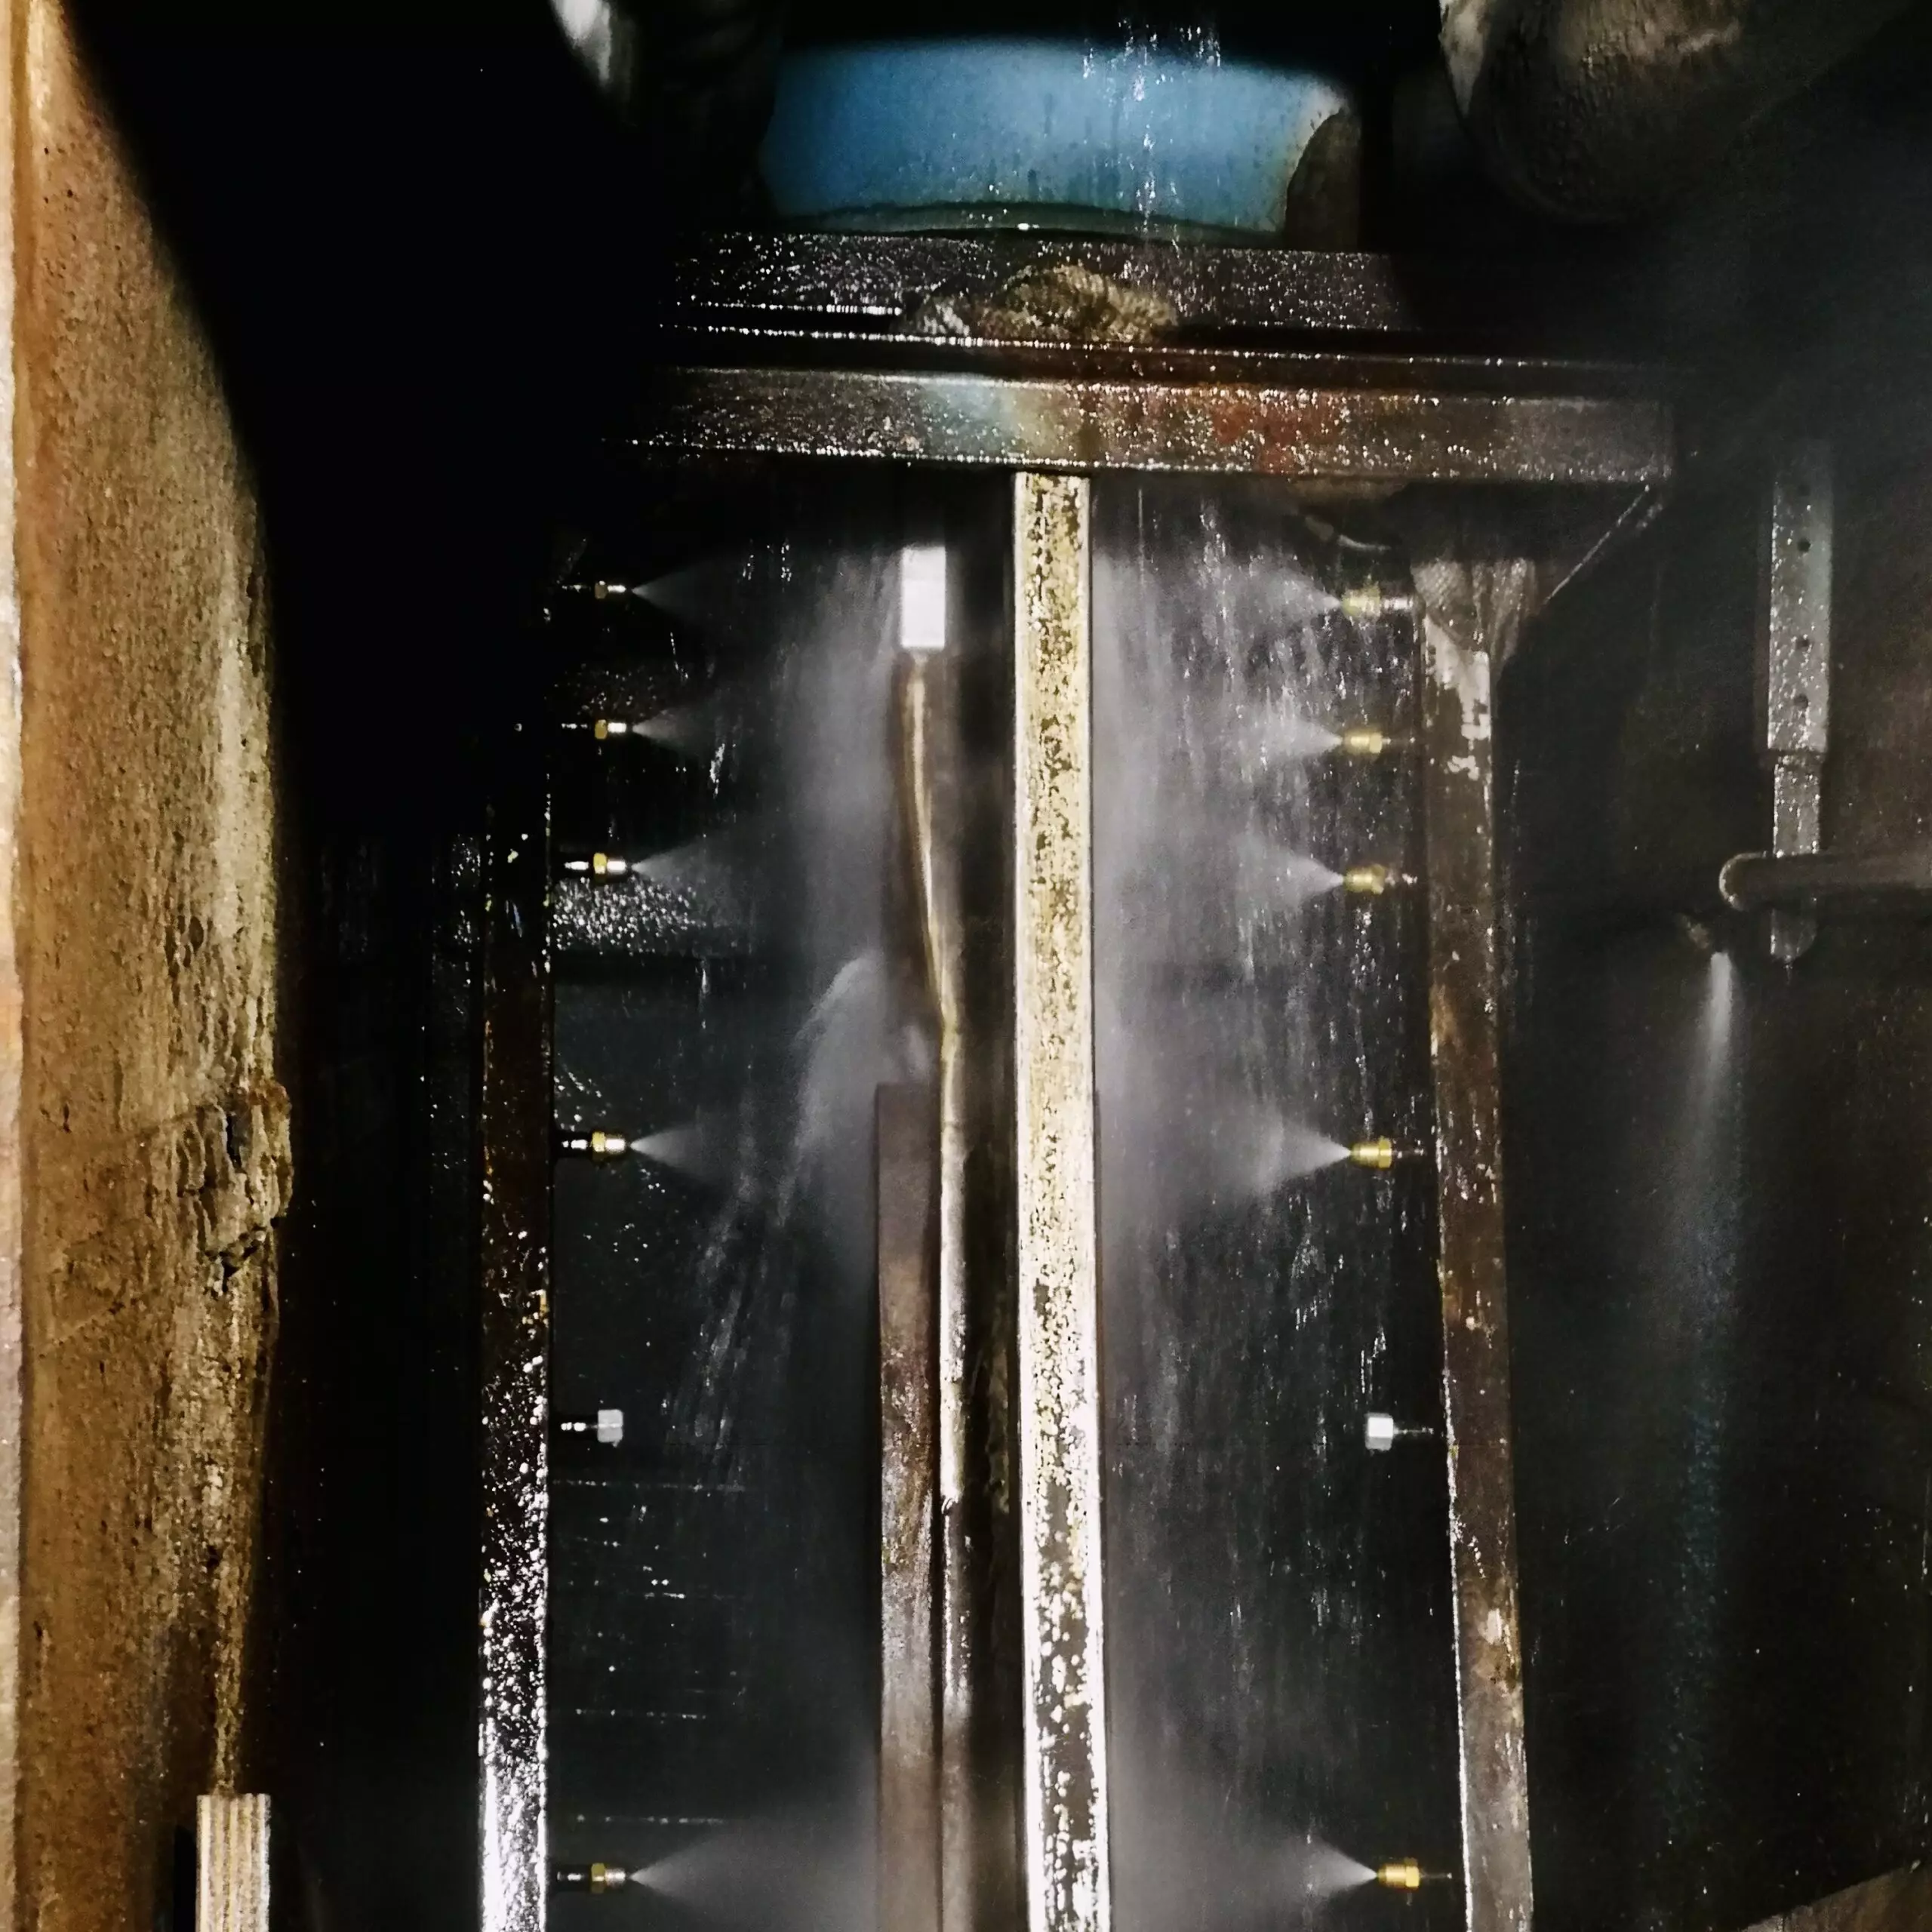 The SCSB instrument during a real water spray measurement operation